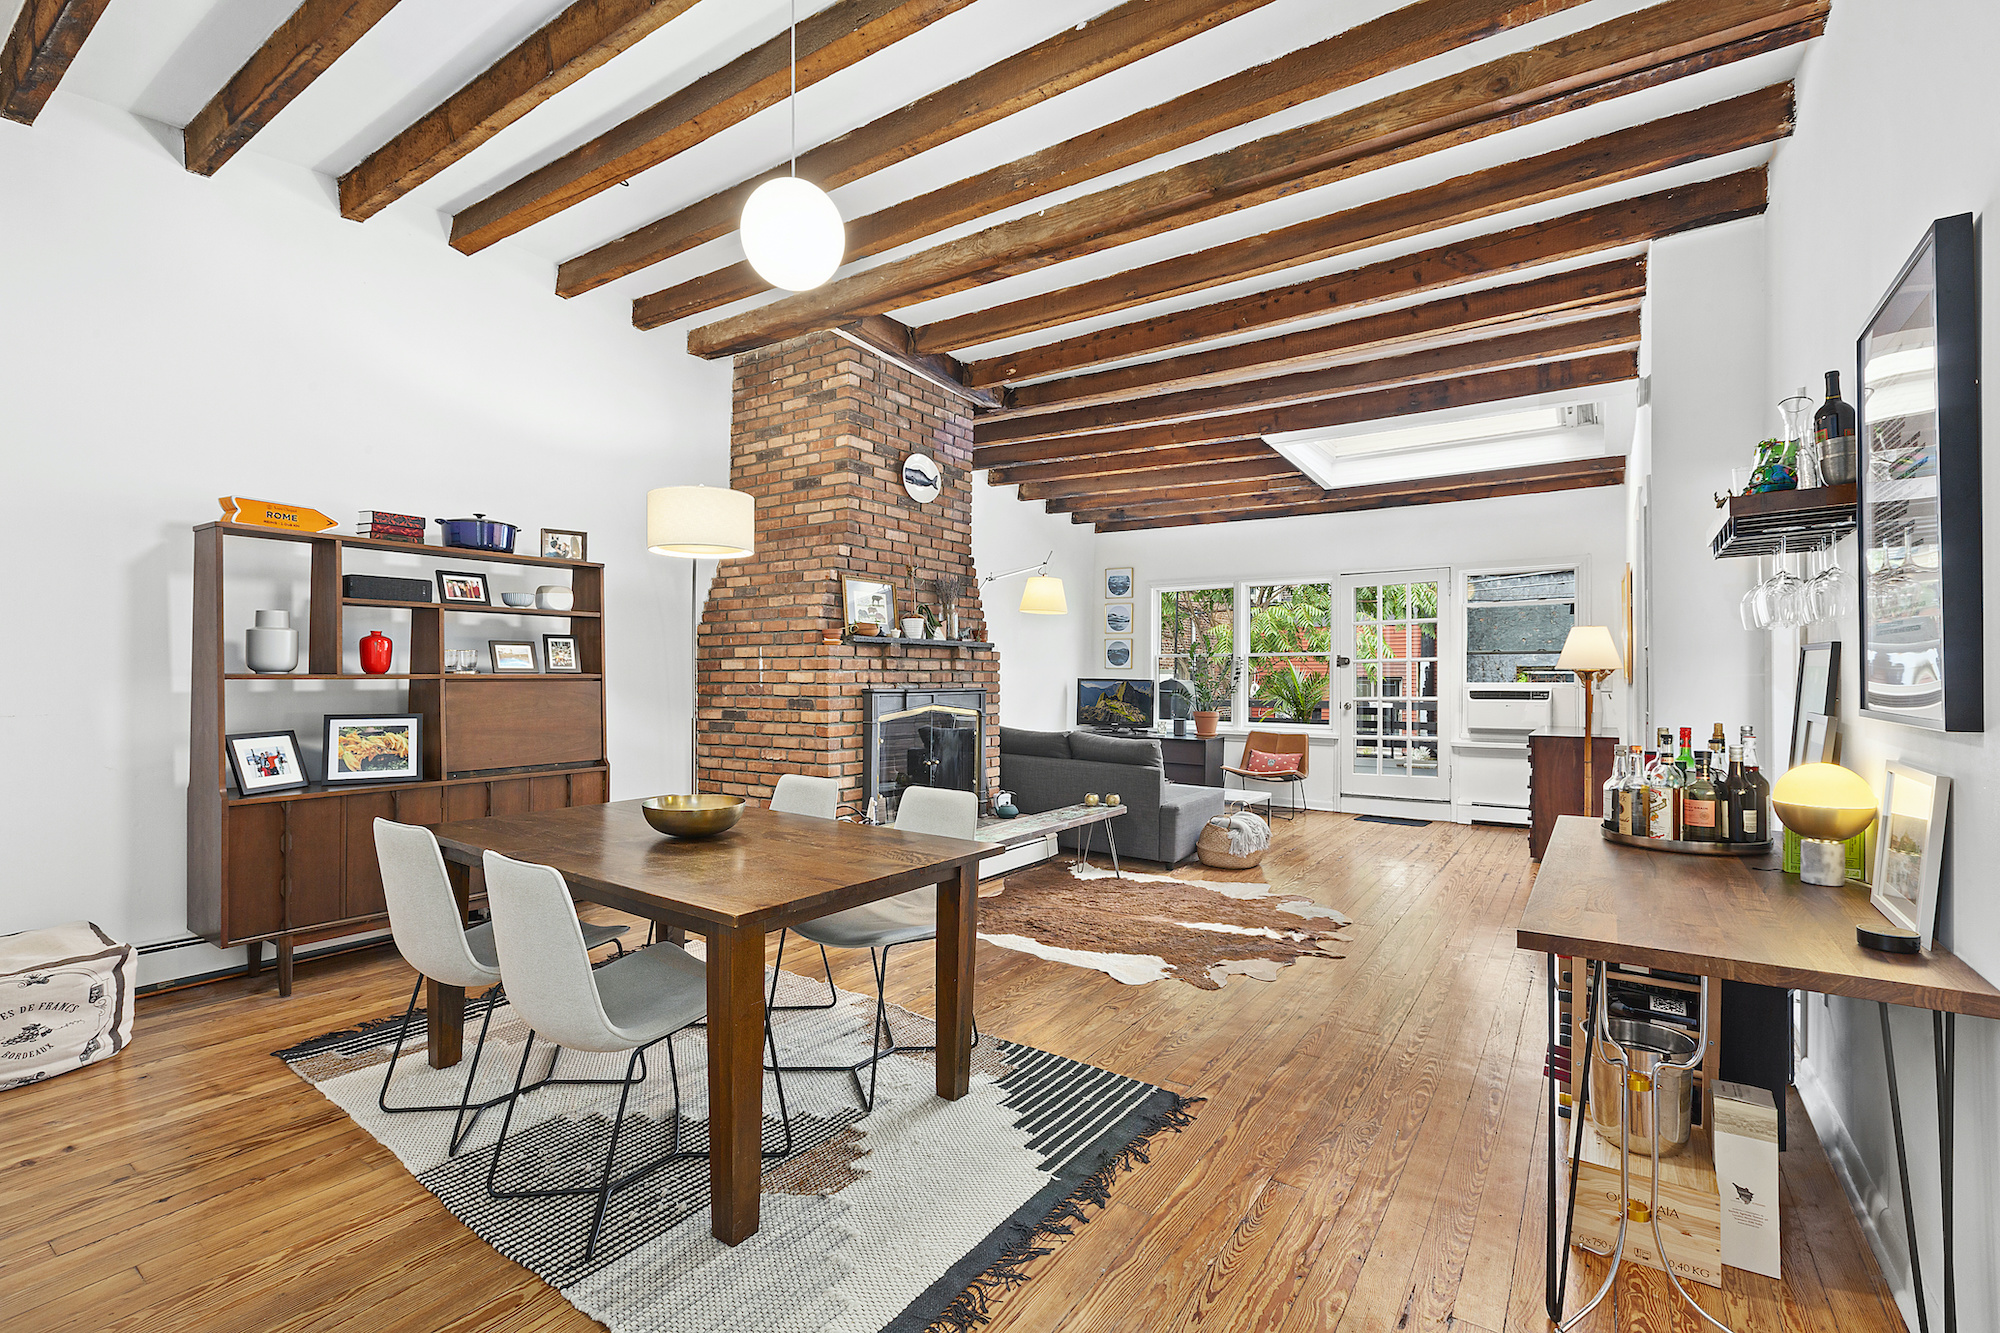 Live in an 1830 Cobble Hill carriage house for $4,100 a month